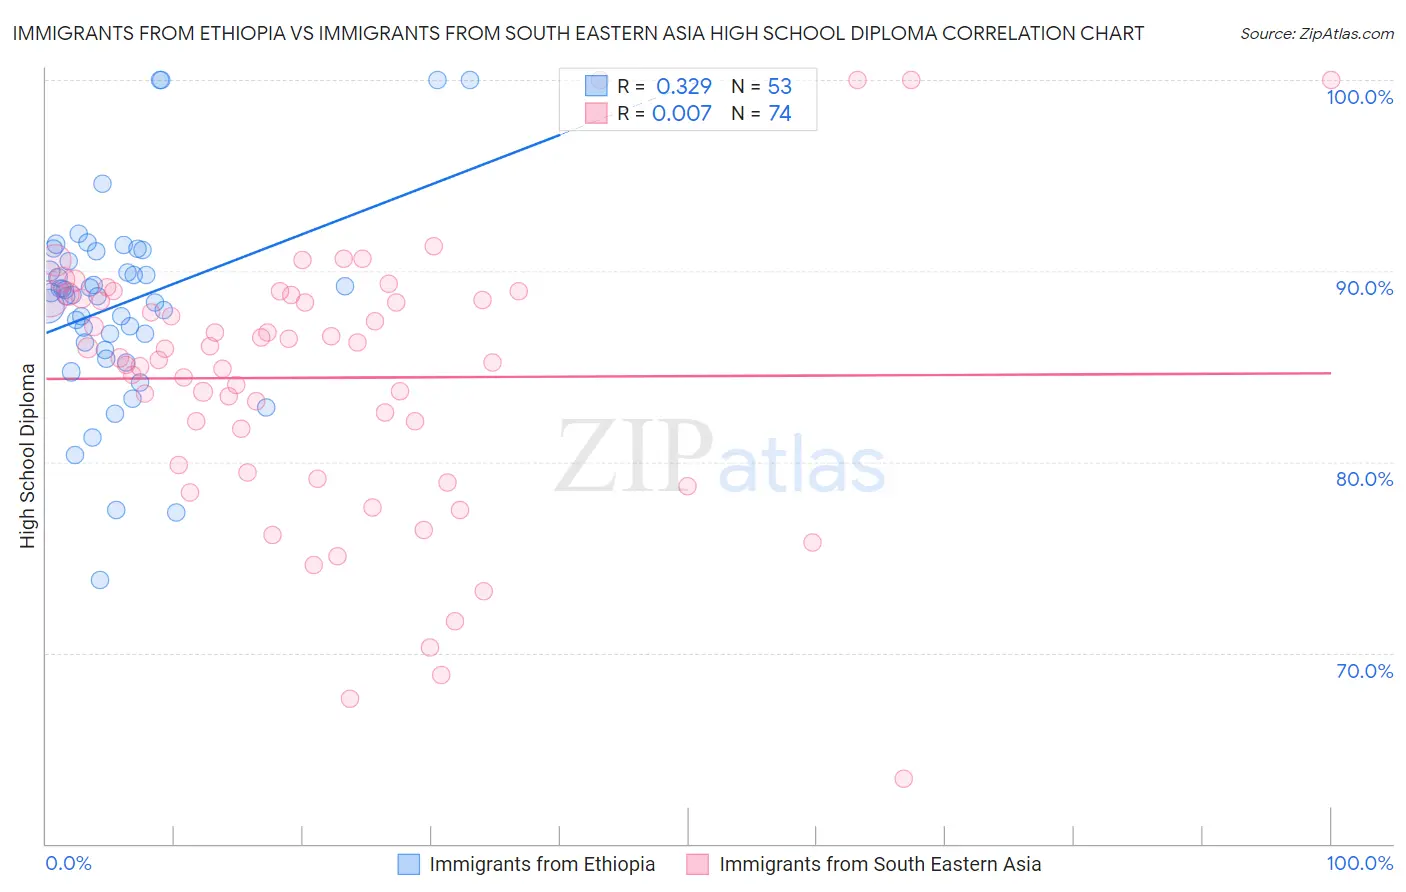 Immigrants from Ethiopia vs Immigrants from South Eastern Asia High School Diploma